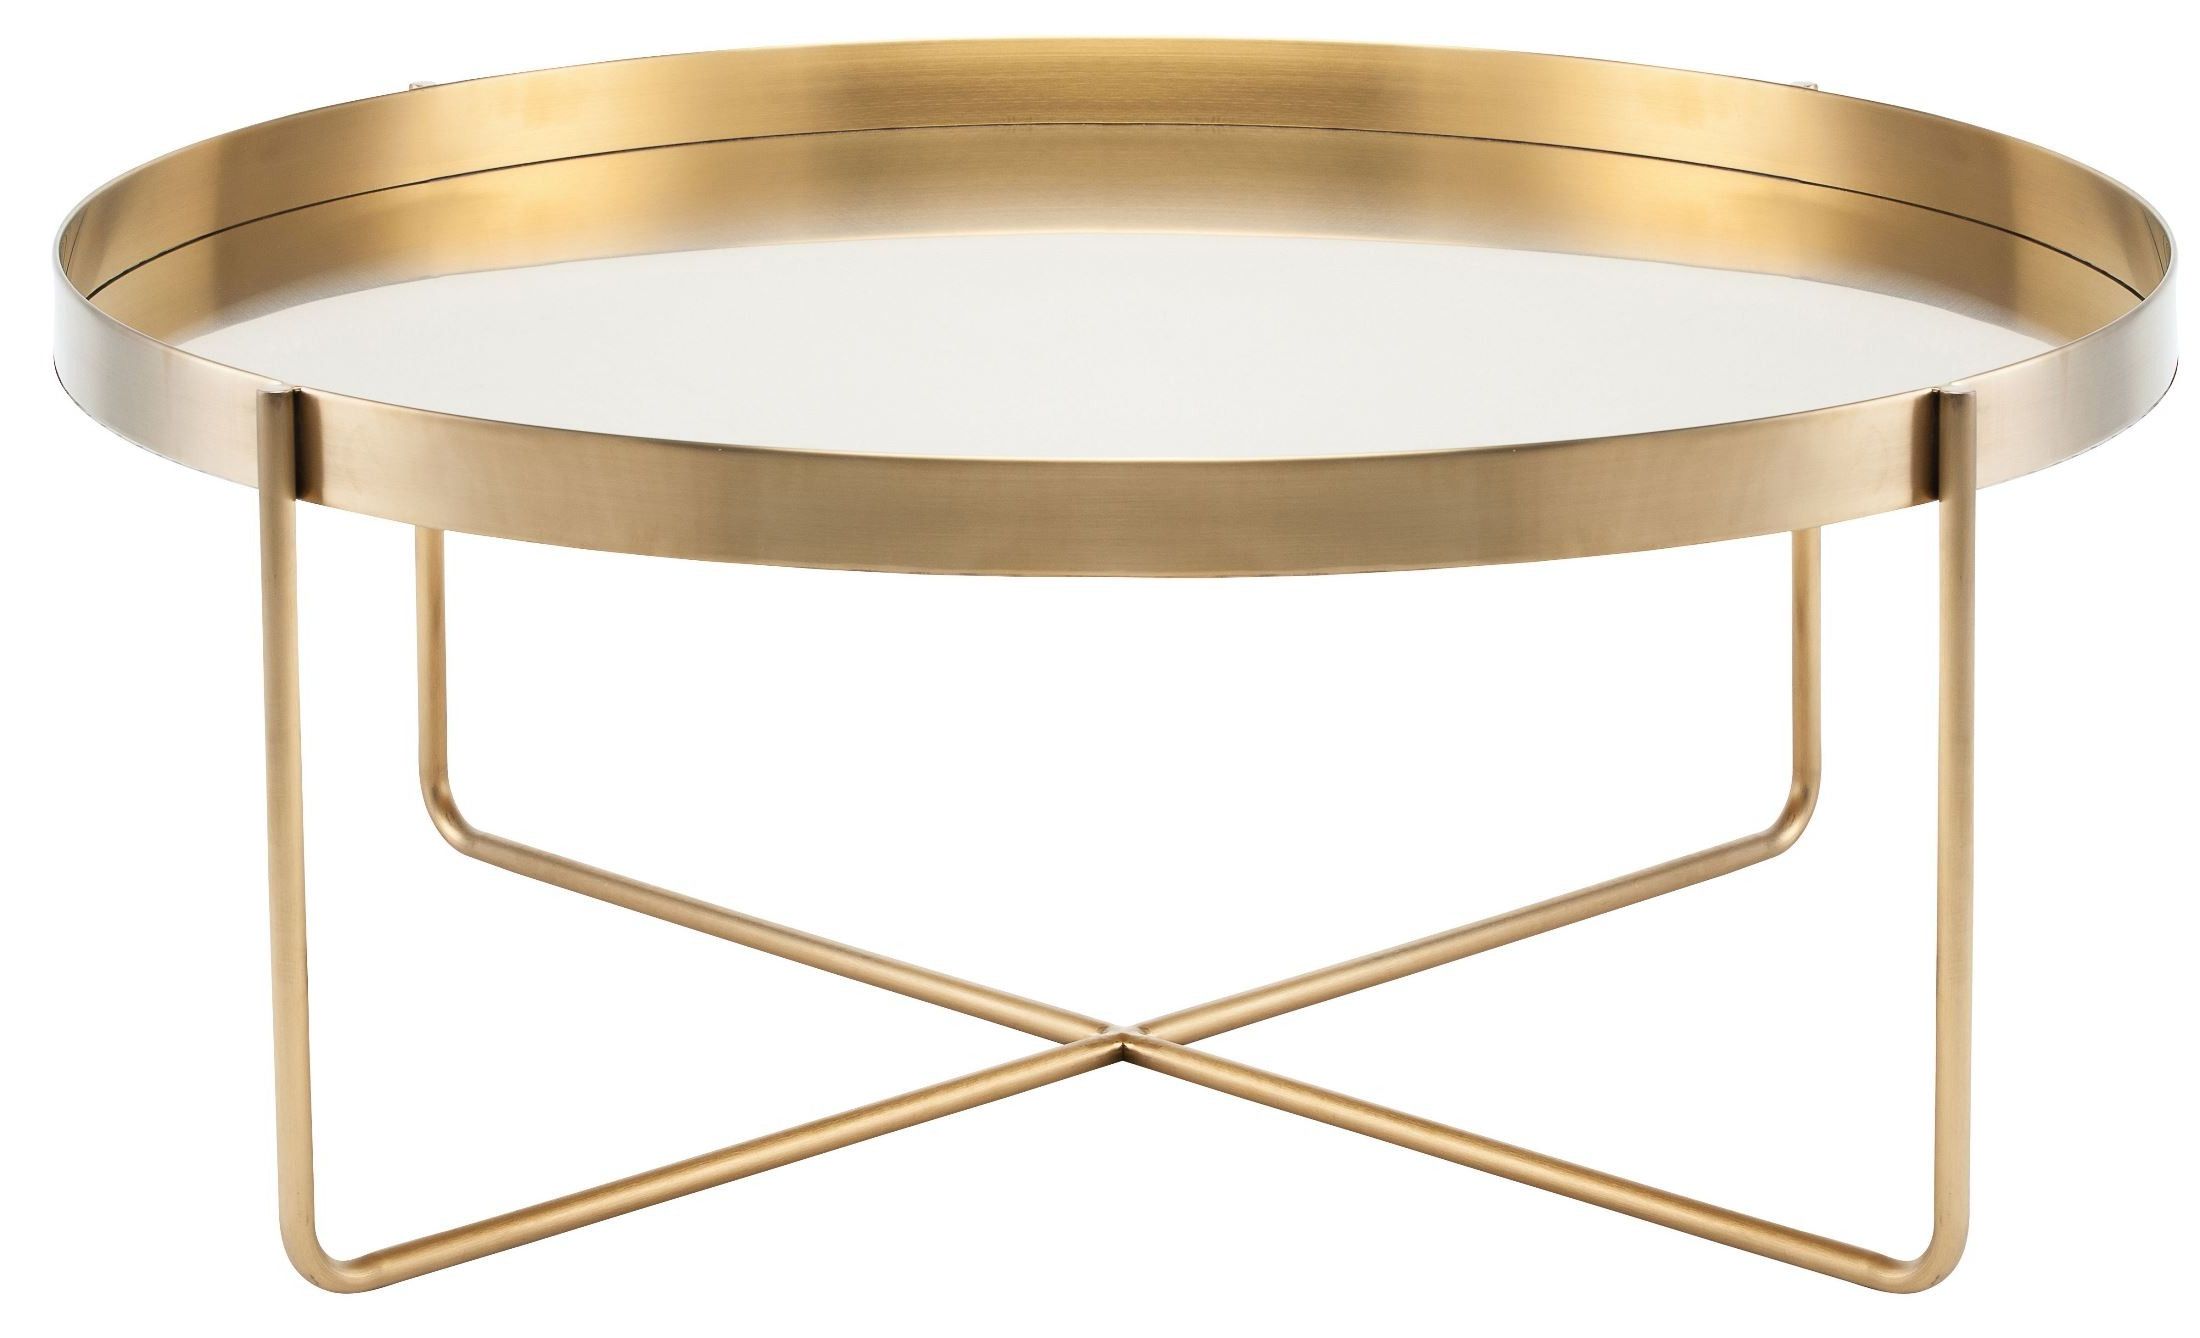 Antique Gold Aluminum Coffee Tables With Regard To Fashionable Gaultier 40" Gold Metal Coffee Table, Hgde122, Nuevo (View 9 of 20)